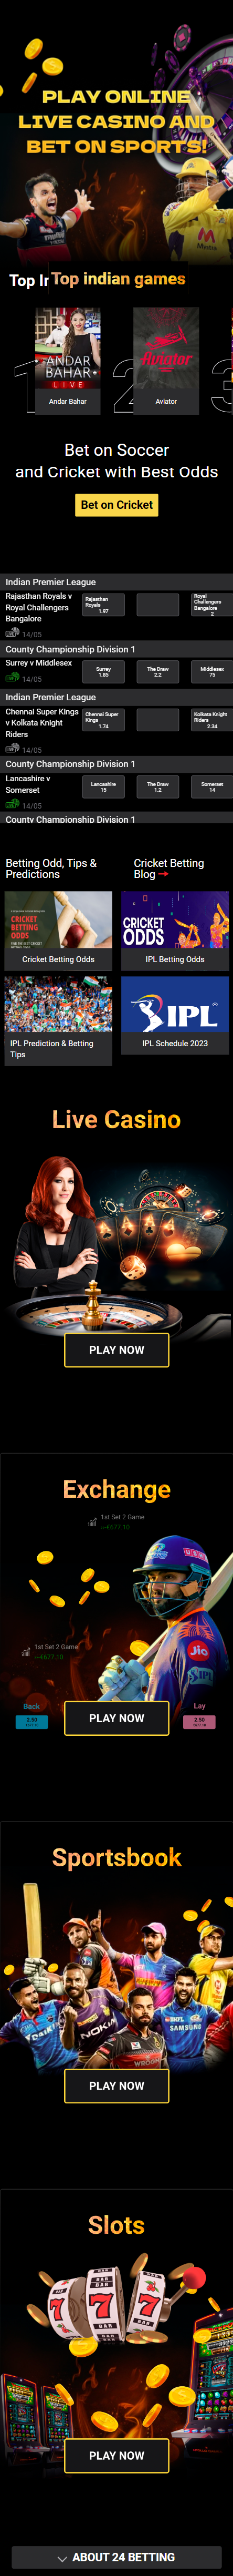 Bet, Spin, Win - 24Betting Casino Has It All